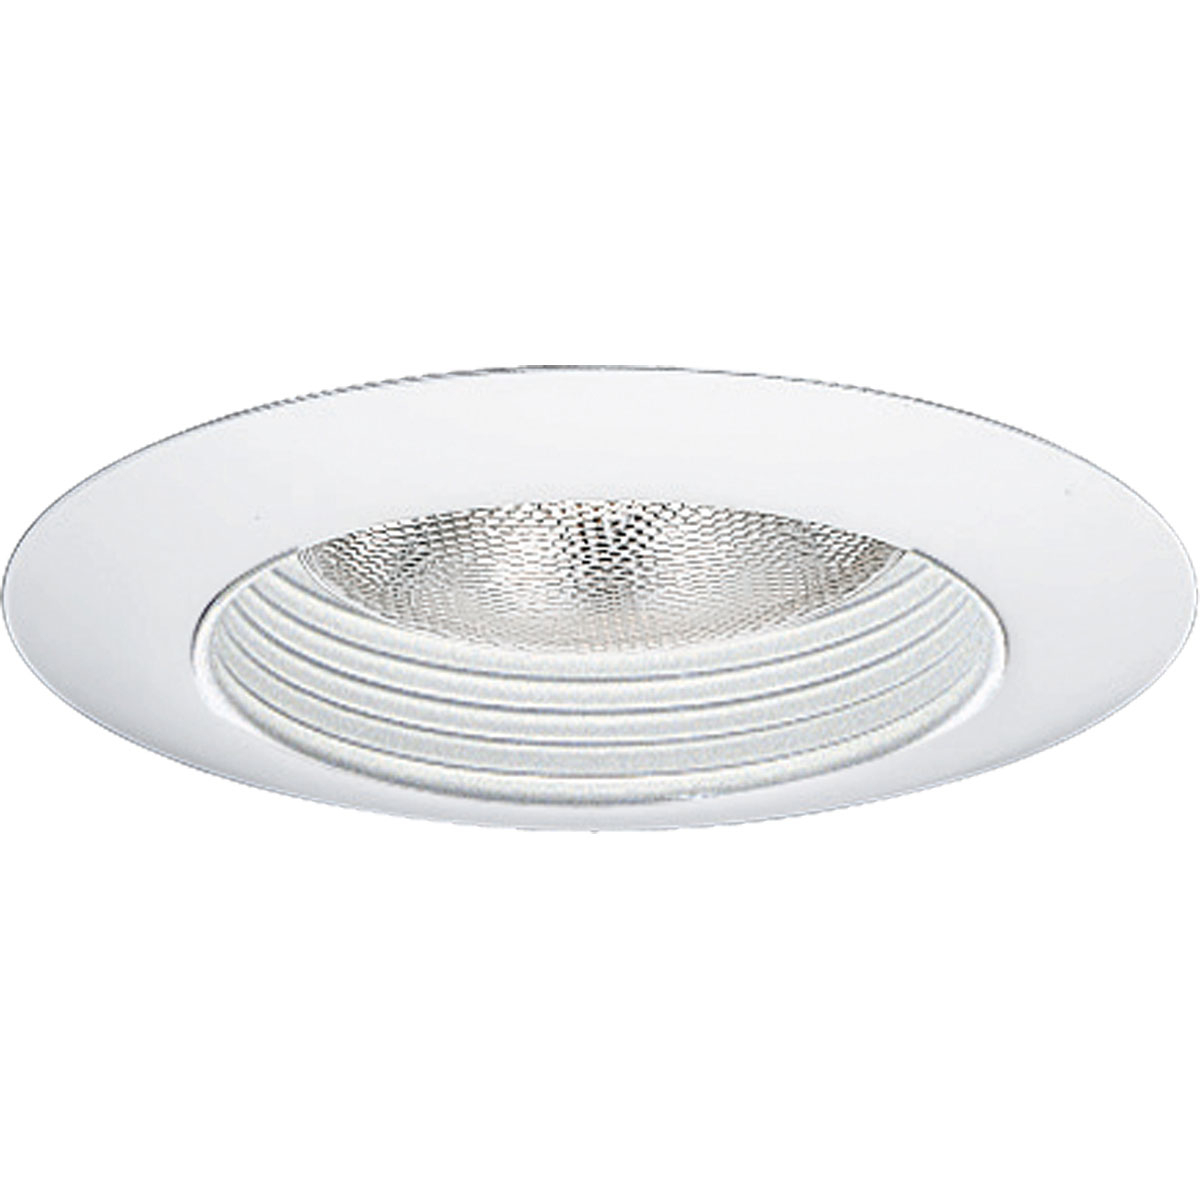 6 in Step Baffle Splay in White finish with bright white powder painted metal flange. For insulated ceilings. 8-3/4 in outside diameter.